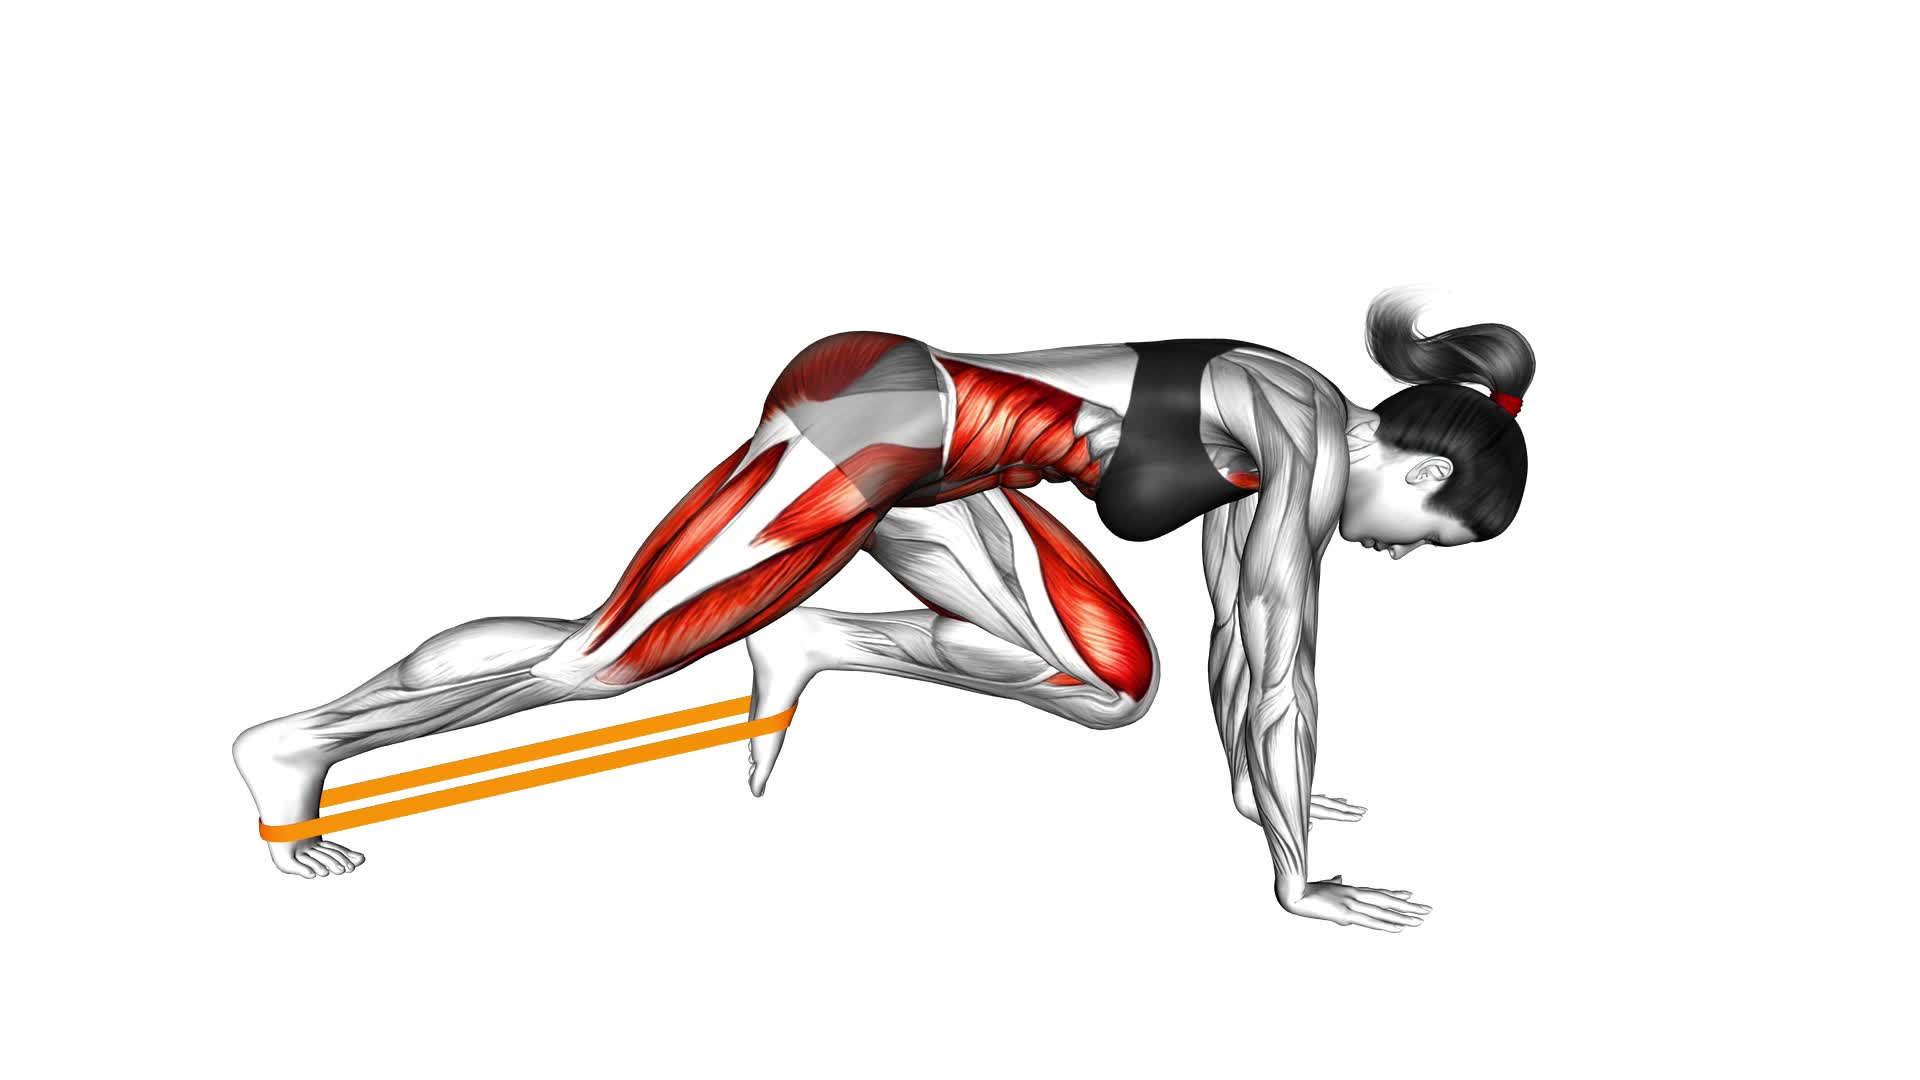 Resistance Band Plank March (female) - Video Exercise Guide & Tips